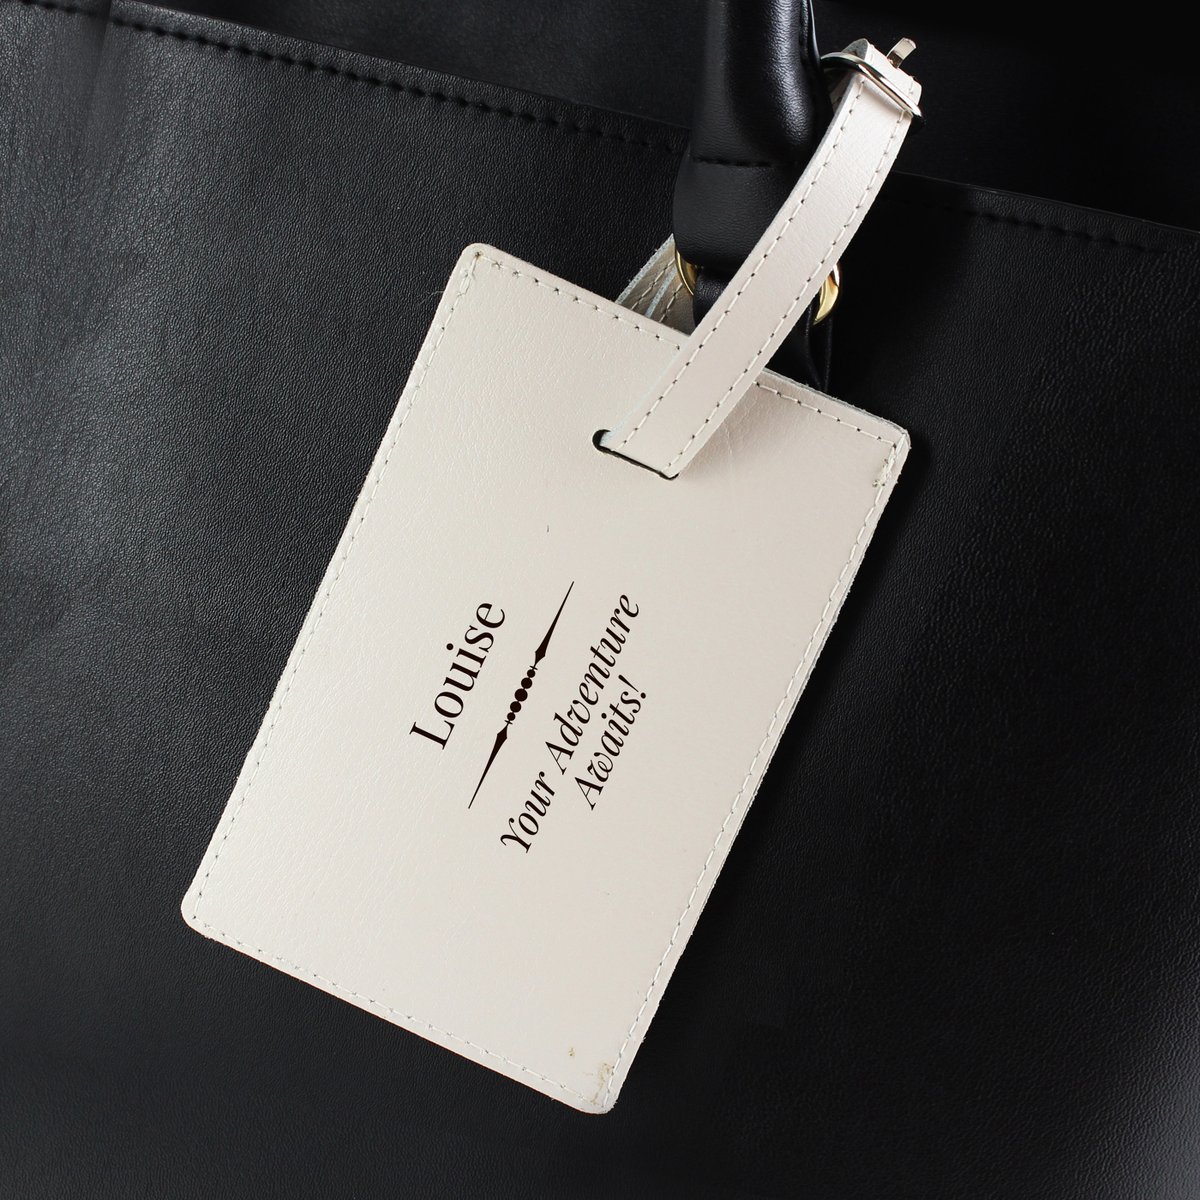 This cream leather luggage tag is the perfect present for anyone going on a travelling adventure & can be added to the handle of a suitcase or rucksack lilyblueuk.co.uk/personalised-c…

#travel #giftideas #letterboxgifts #stockingfillers #mhhsbd #personalised